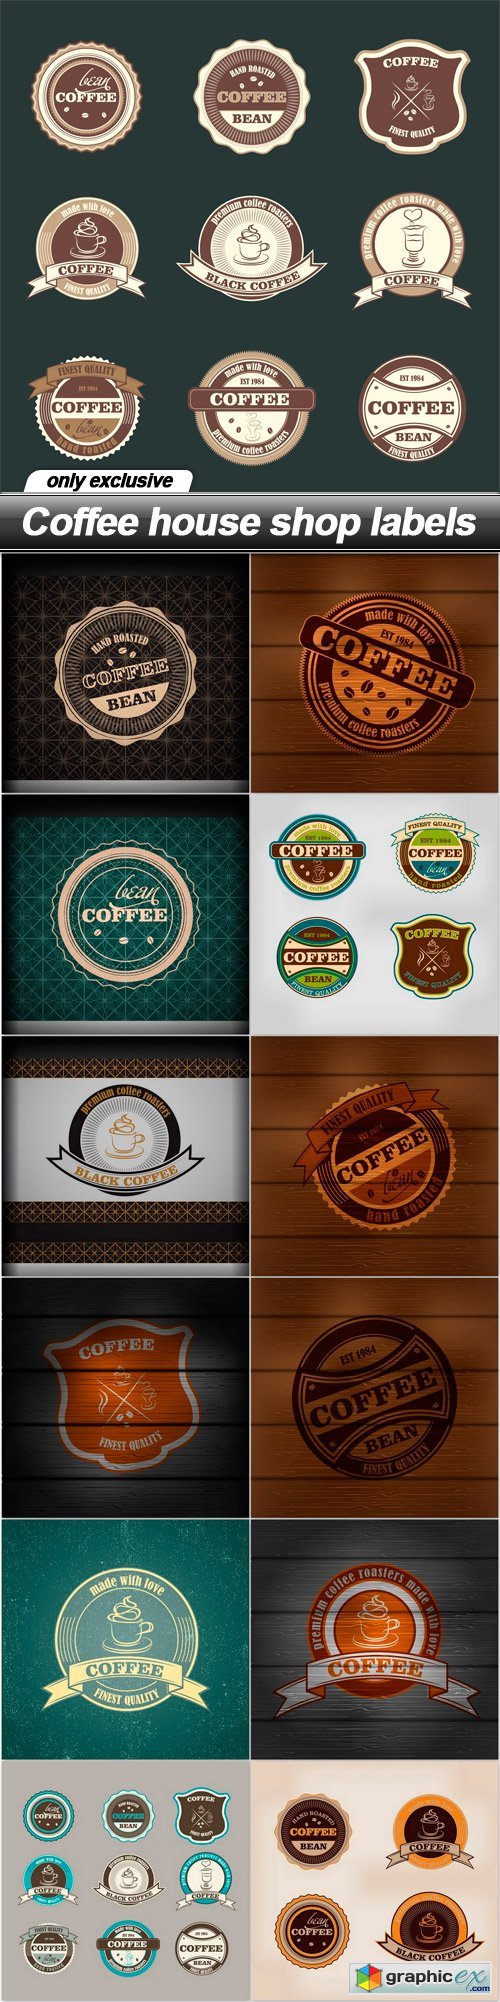 Coffee house shop labels - 13 EPS